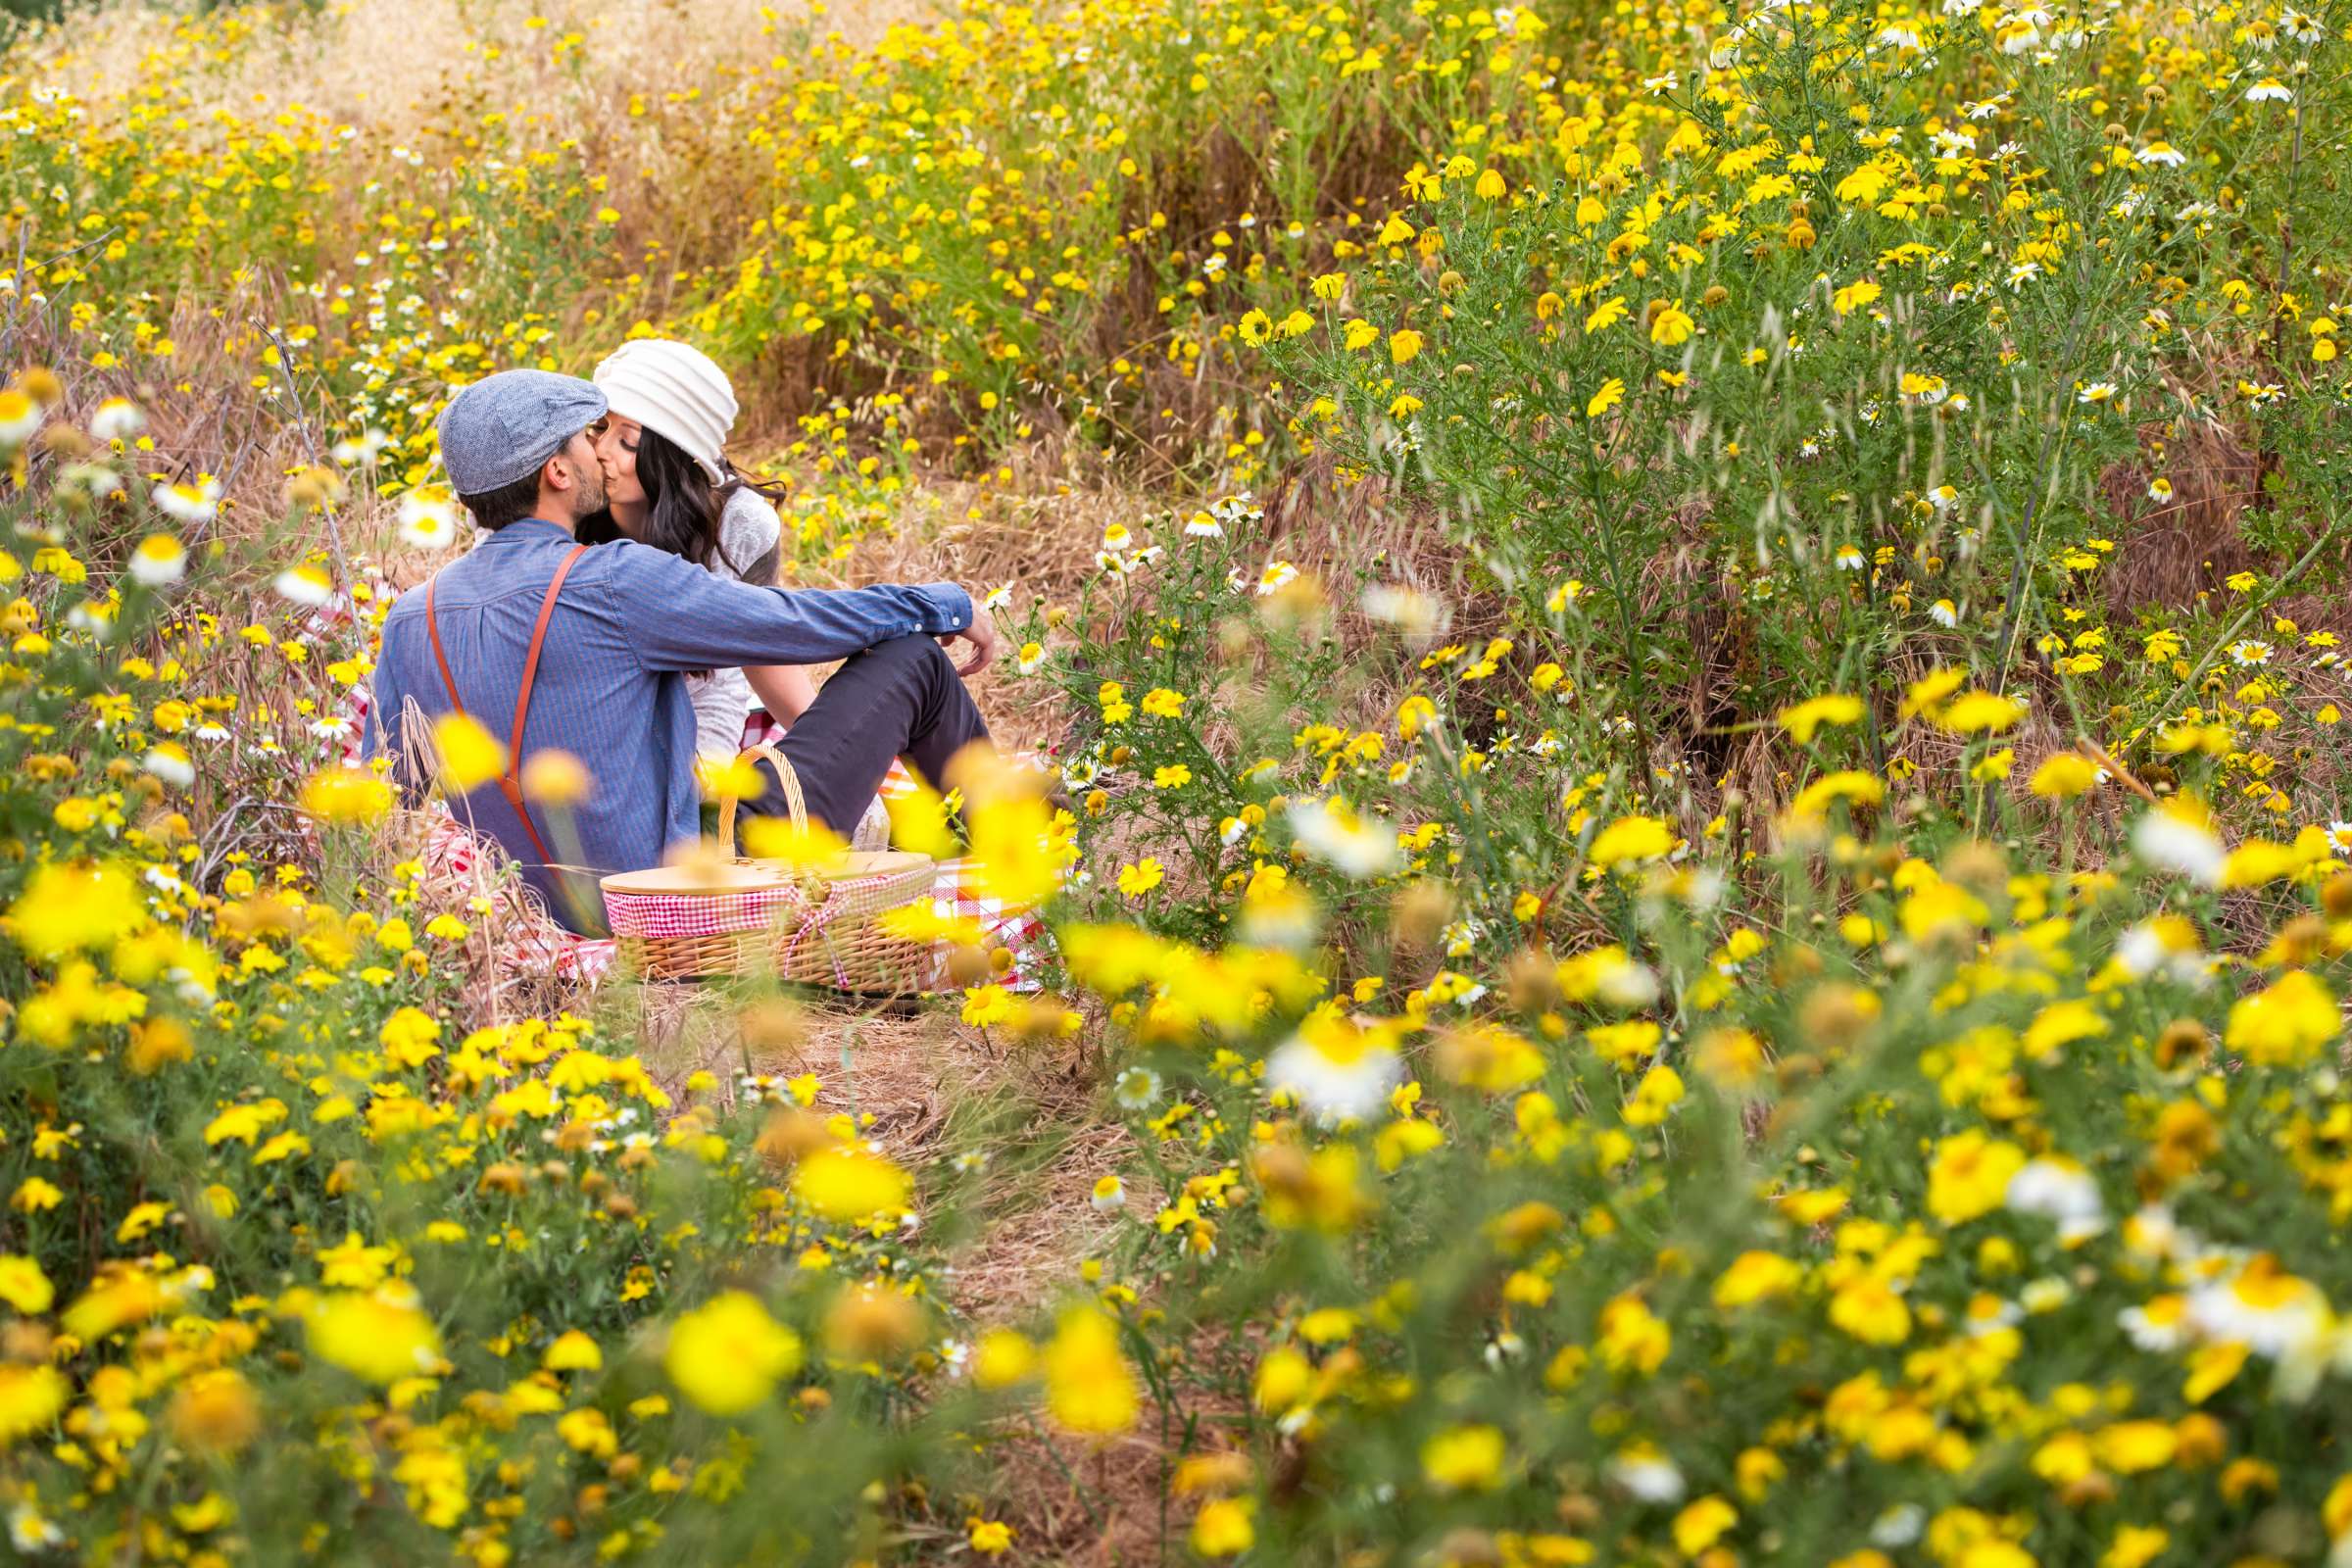 Flower Field at Engagement, Am and Casey Engagement Photo #1 by True Photography